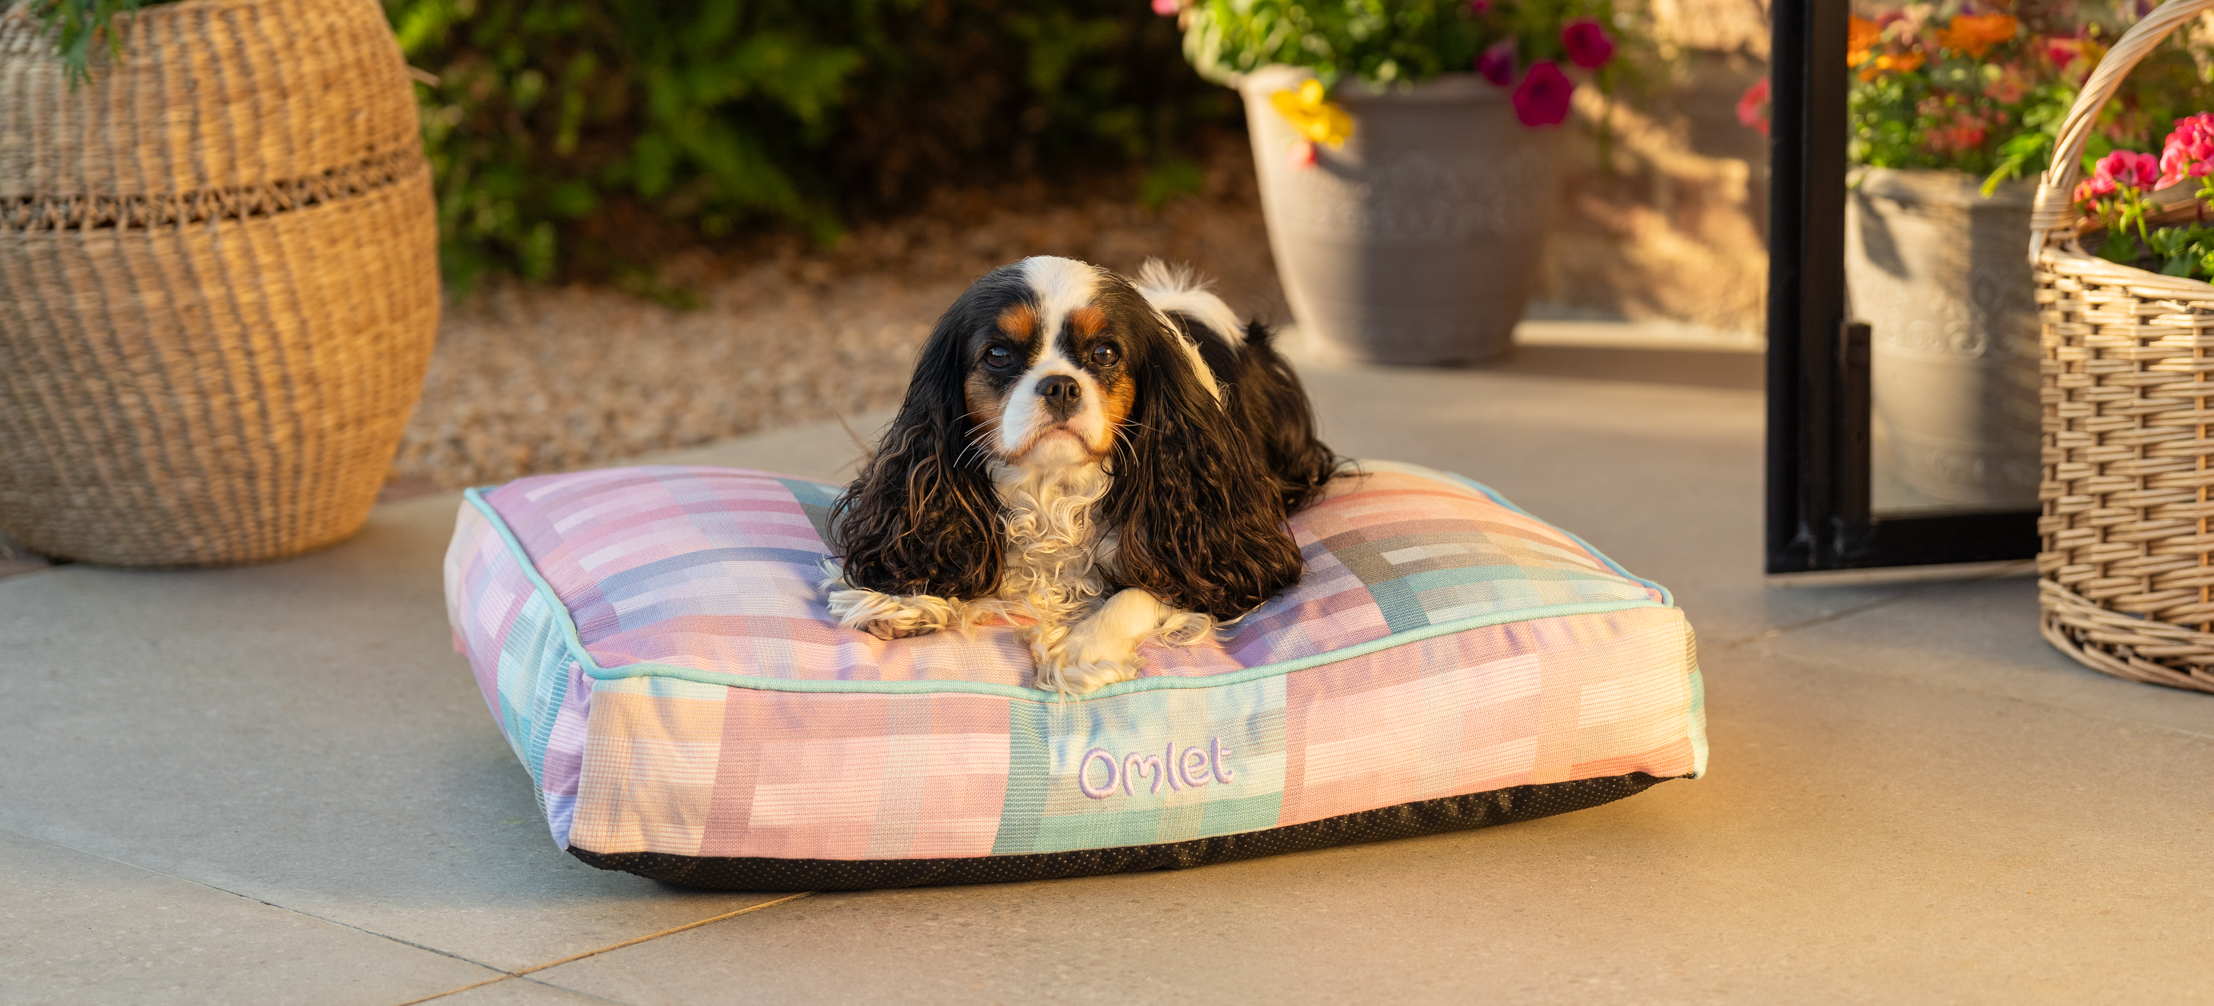 Cavalier King Charles spaniel on their Omlet Cushion dog bed in Prism Kaleidoscope